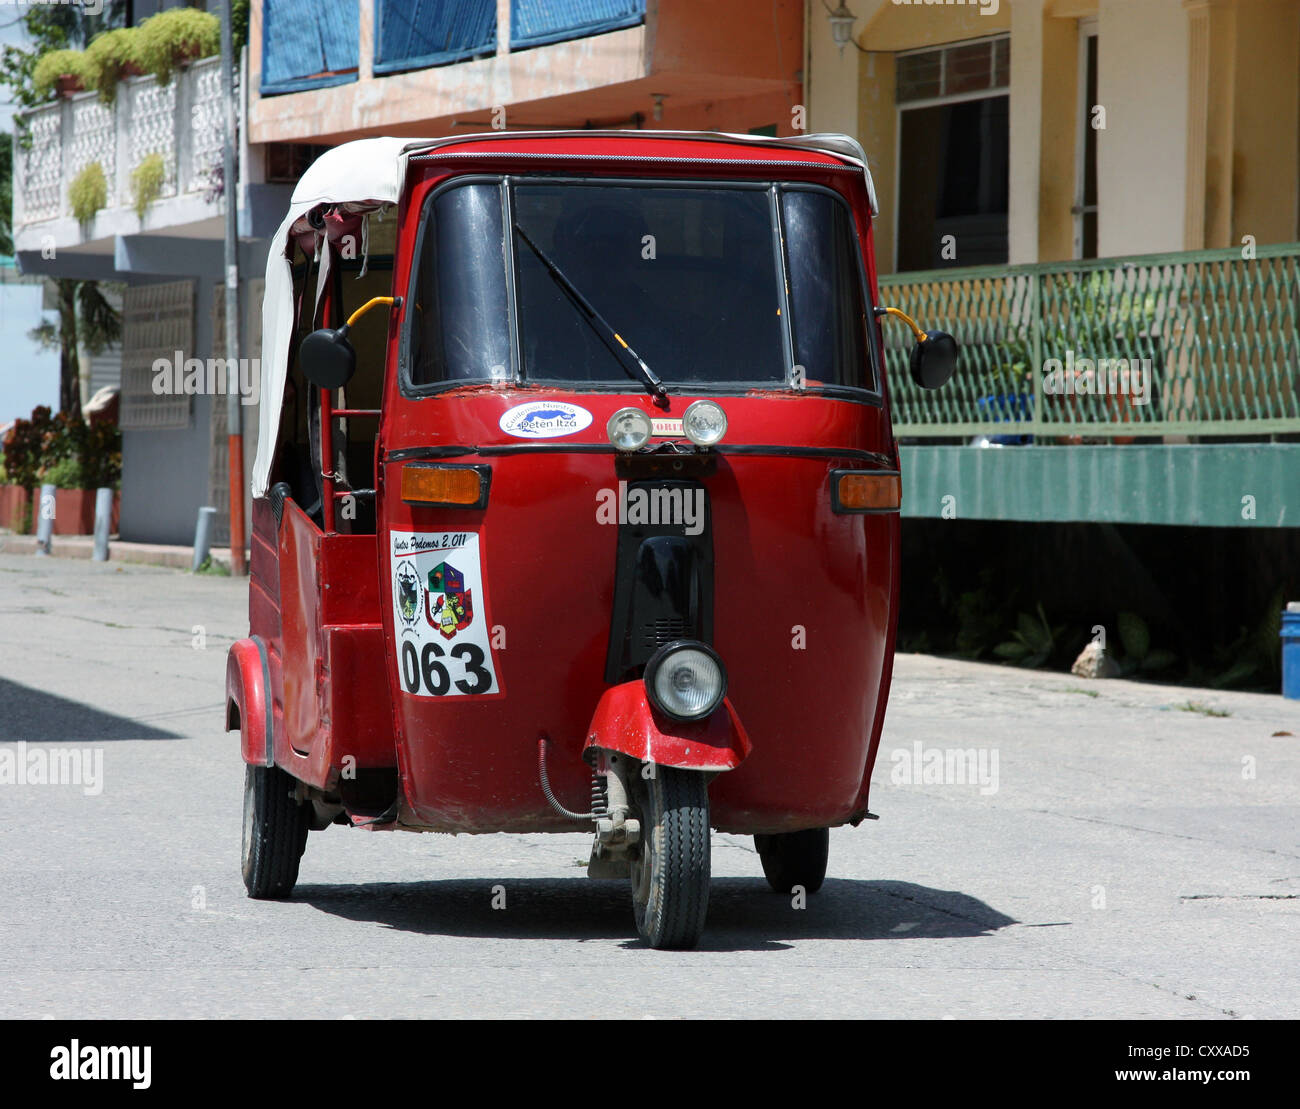 Bajaj Tricycle motor rickshaw taxi races through the picturesque streets of Flores, Guatemala Stock Photo